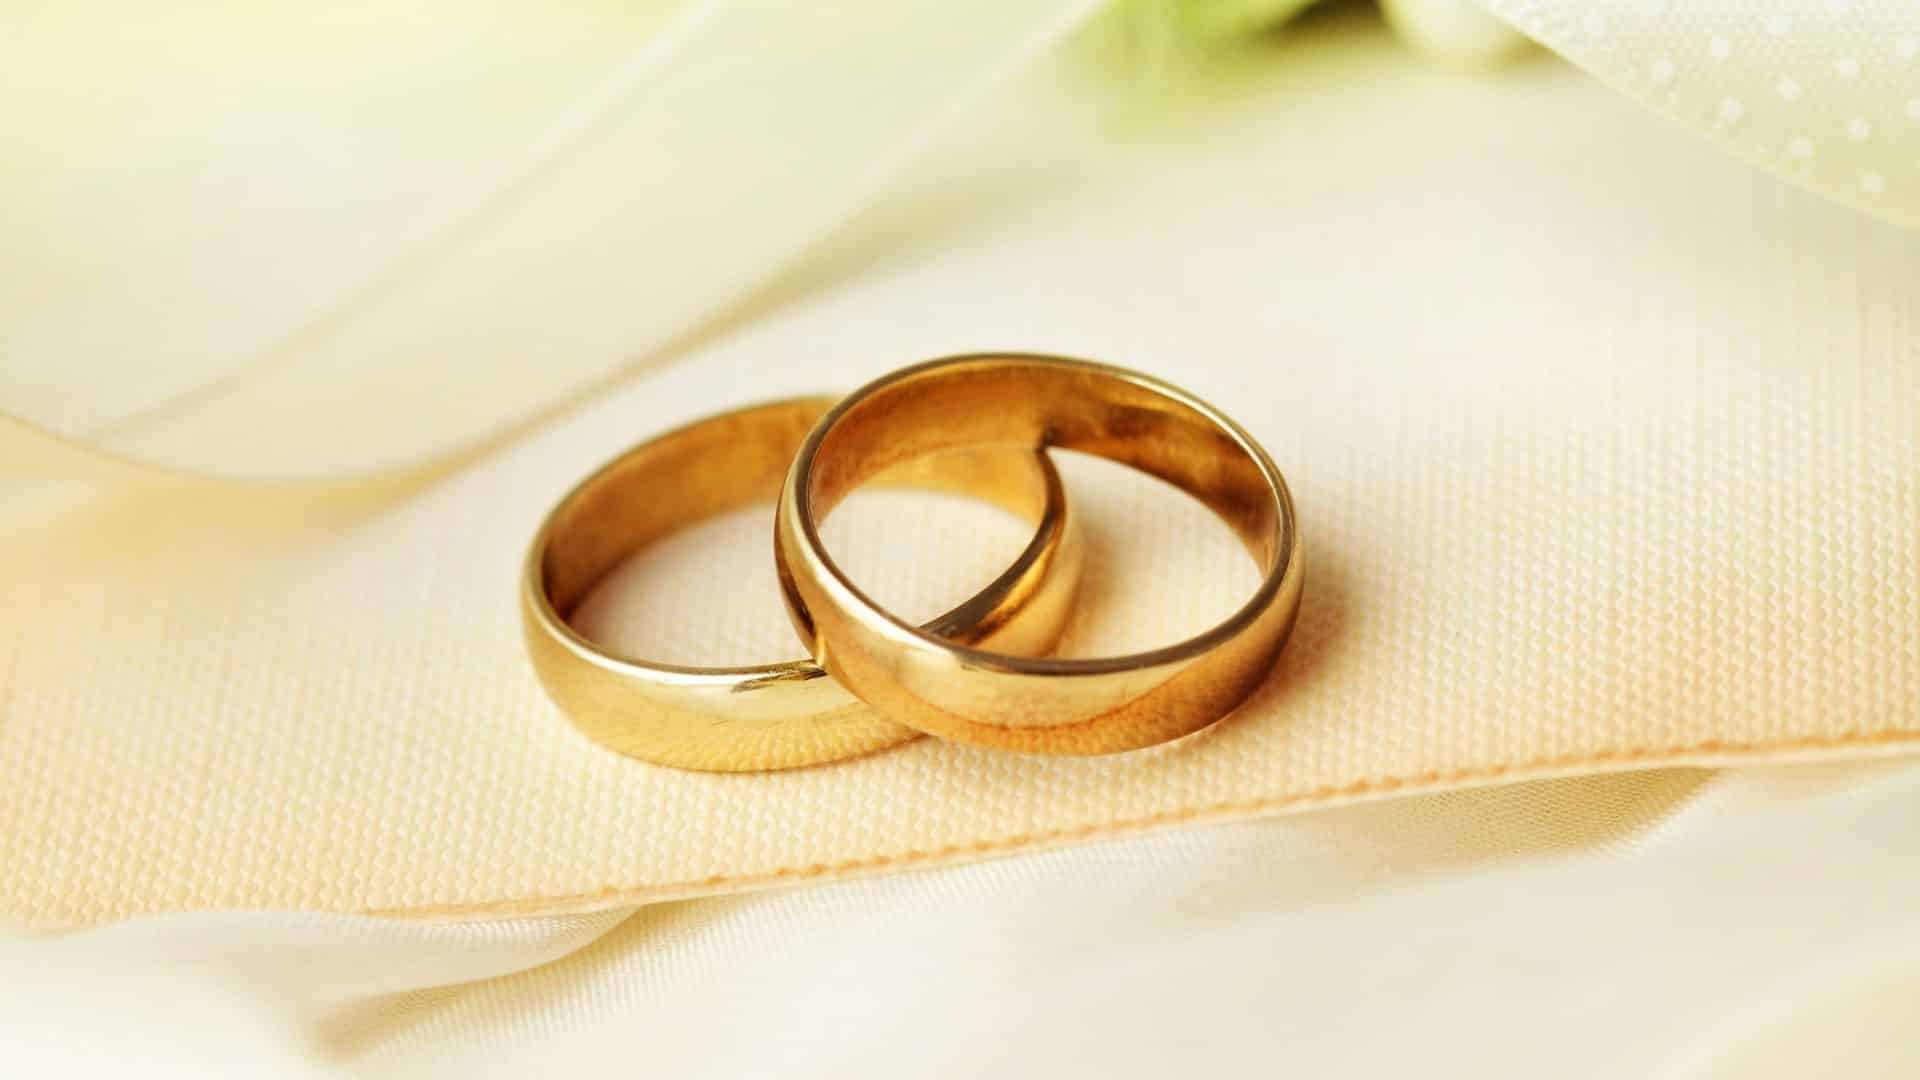 Close up view of two gold wedding bands